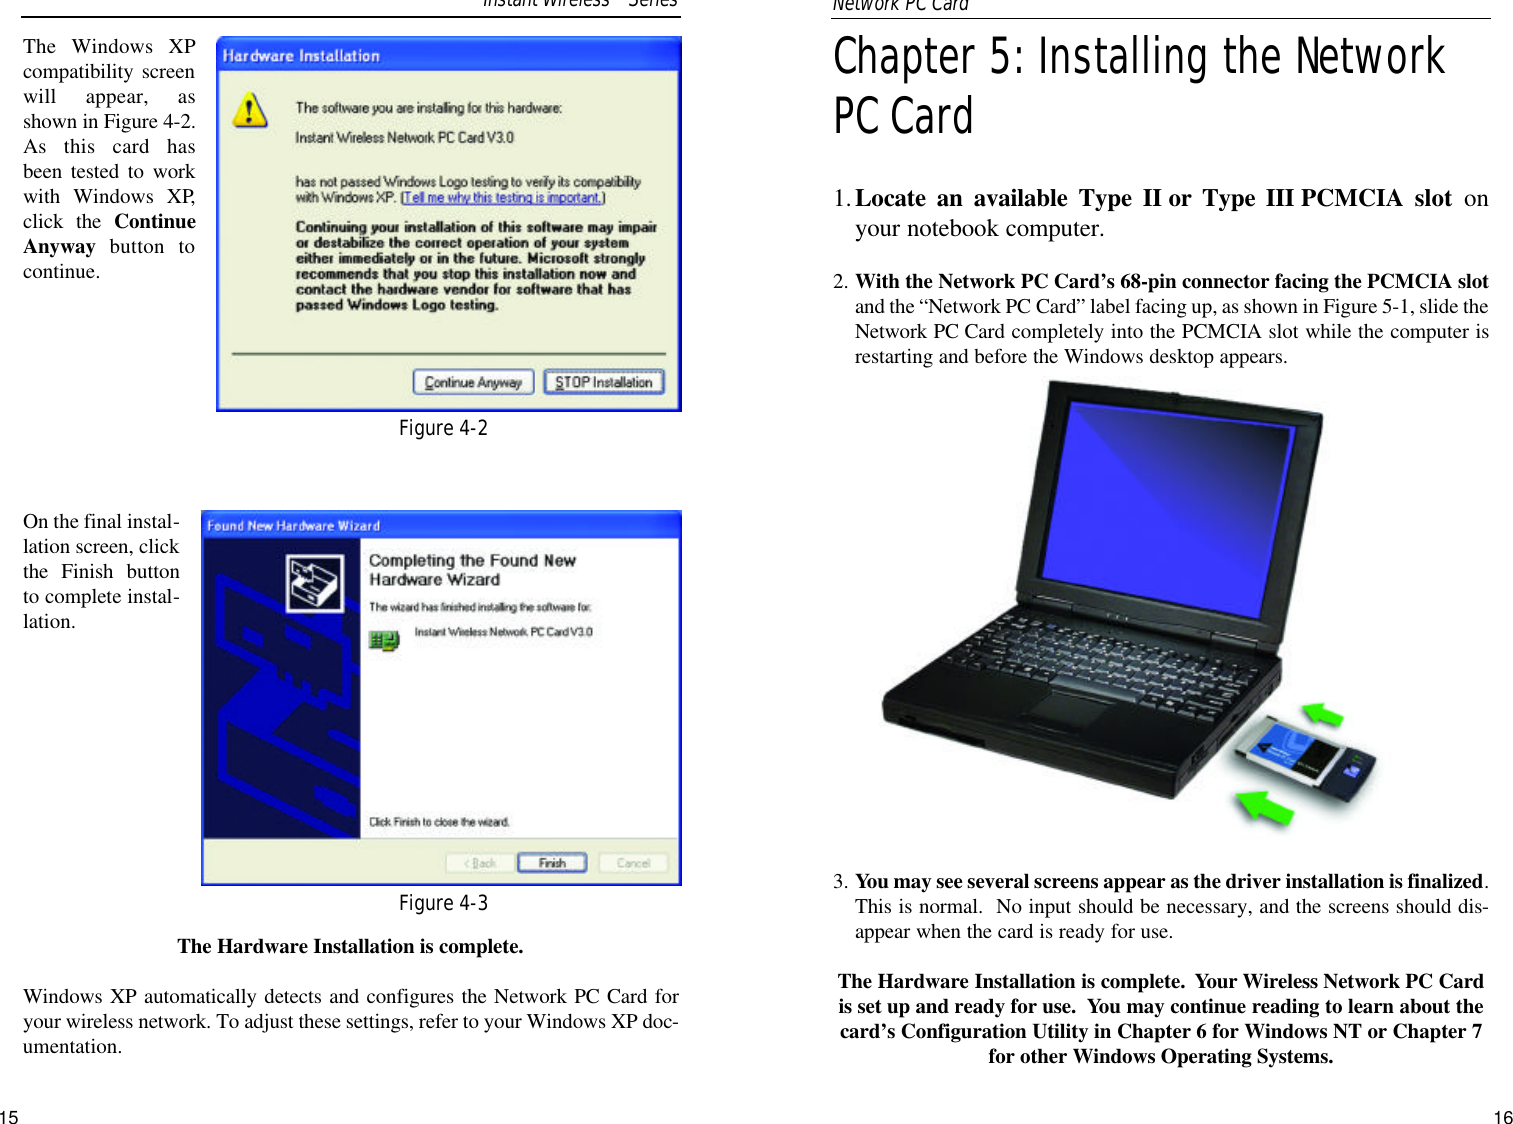 Chapter 5: Installing the NetworkPC Card 1.Locate an available Type II or Type III PCMCIA slot onyour notebook computer.2. With the Network PC Card’s 68-pin connector facing the PCMCIA slotand the “Network PC Card” label facing up, as shown in Figure 5-1, slide theNetwork PC Card completely into the PCMCIA slot while the computer isrestarting and before the Windows desktop appears.3. You may see several screens appear as the driver installation is finalized.This is normal.  No input should be necessary, and the screens should dis-appear when the card is ready for use.The Hardware Installation is complete.  Your Wireless Network PC Cardis set up and ready for use.  You may continue reading to learn about thecard’s Configuration Utility in Chapter 6 for Windows NT or Chapter 7for other Windows Operating Systems.The Windows XPcompatibility screenwill appear, asshown in Figure 4-2.As this card hasbeen tested to workwith Windows XP,click the ContinueAnyway  button tocontinue.On the final instal-lation screen, clickthe Finish buttonto complete instal-lation.The Hardware Installation is complete. Windows XP automatically detects and configures the Network PC Card foryour wireless network. To adjust these settings, refer to your Windows XP doc-umentation.15Figure 4-2Figure 4-3Instant WirelessTMSeriesNetwork PC Card 16